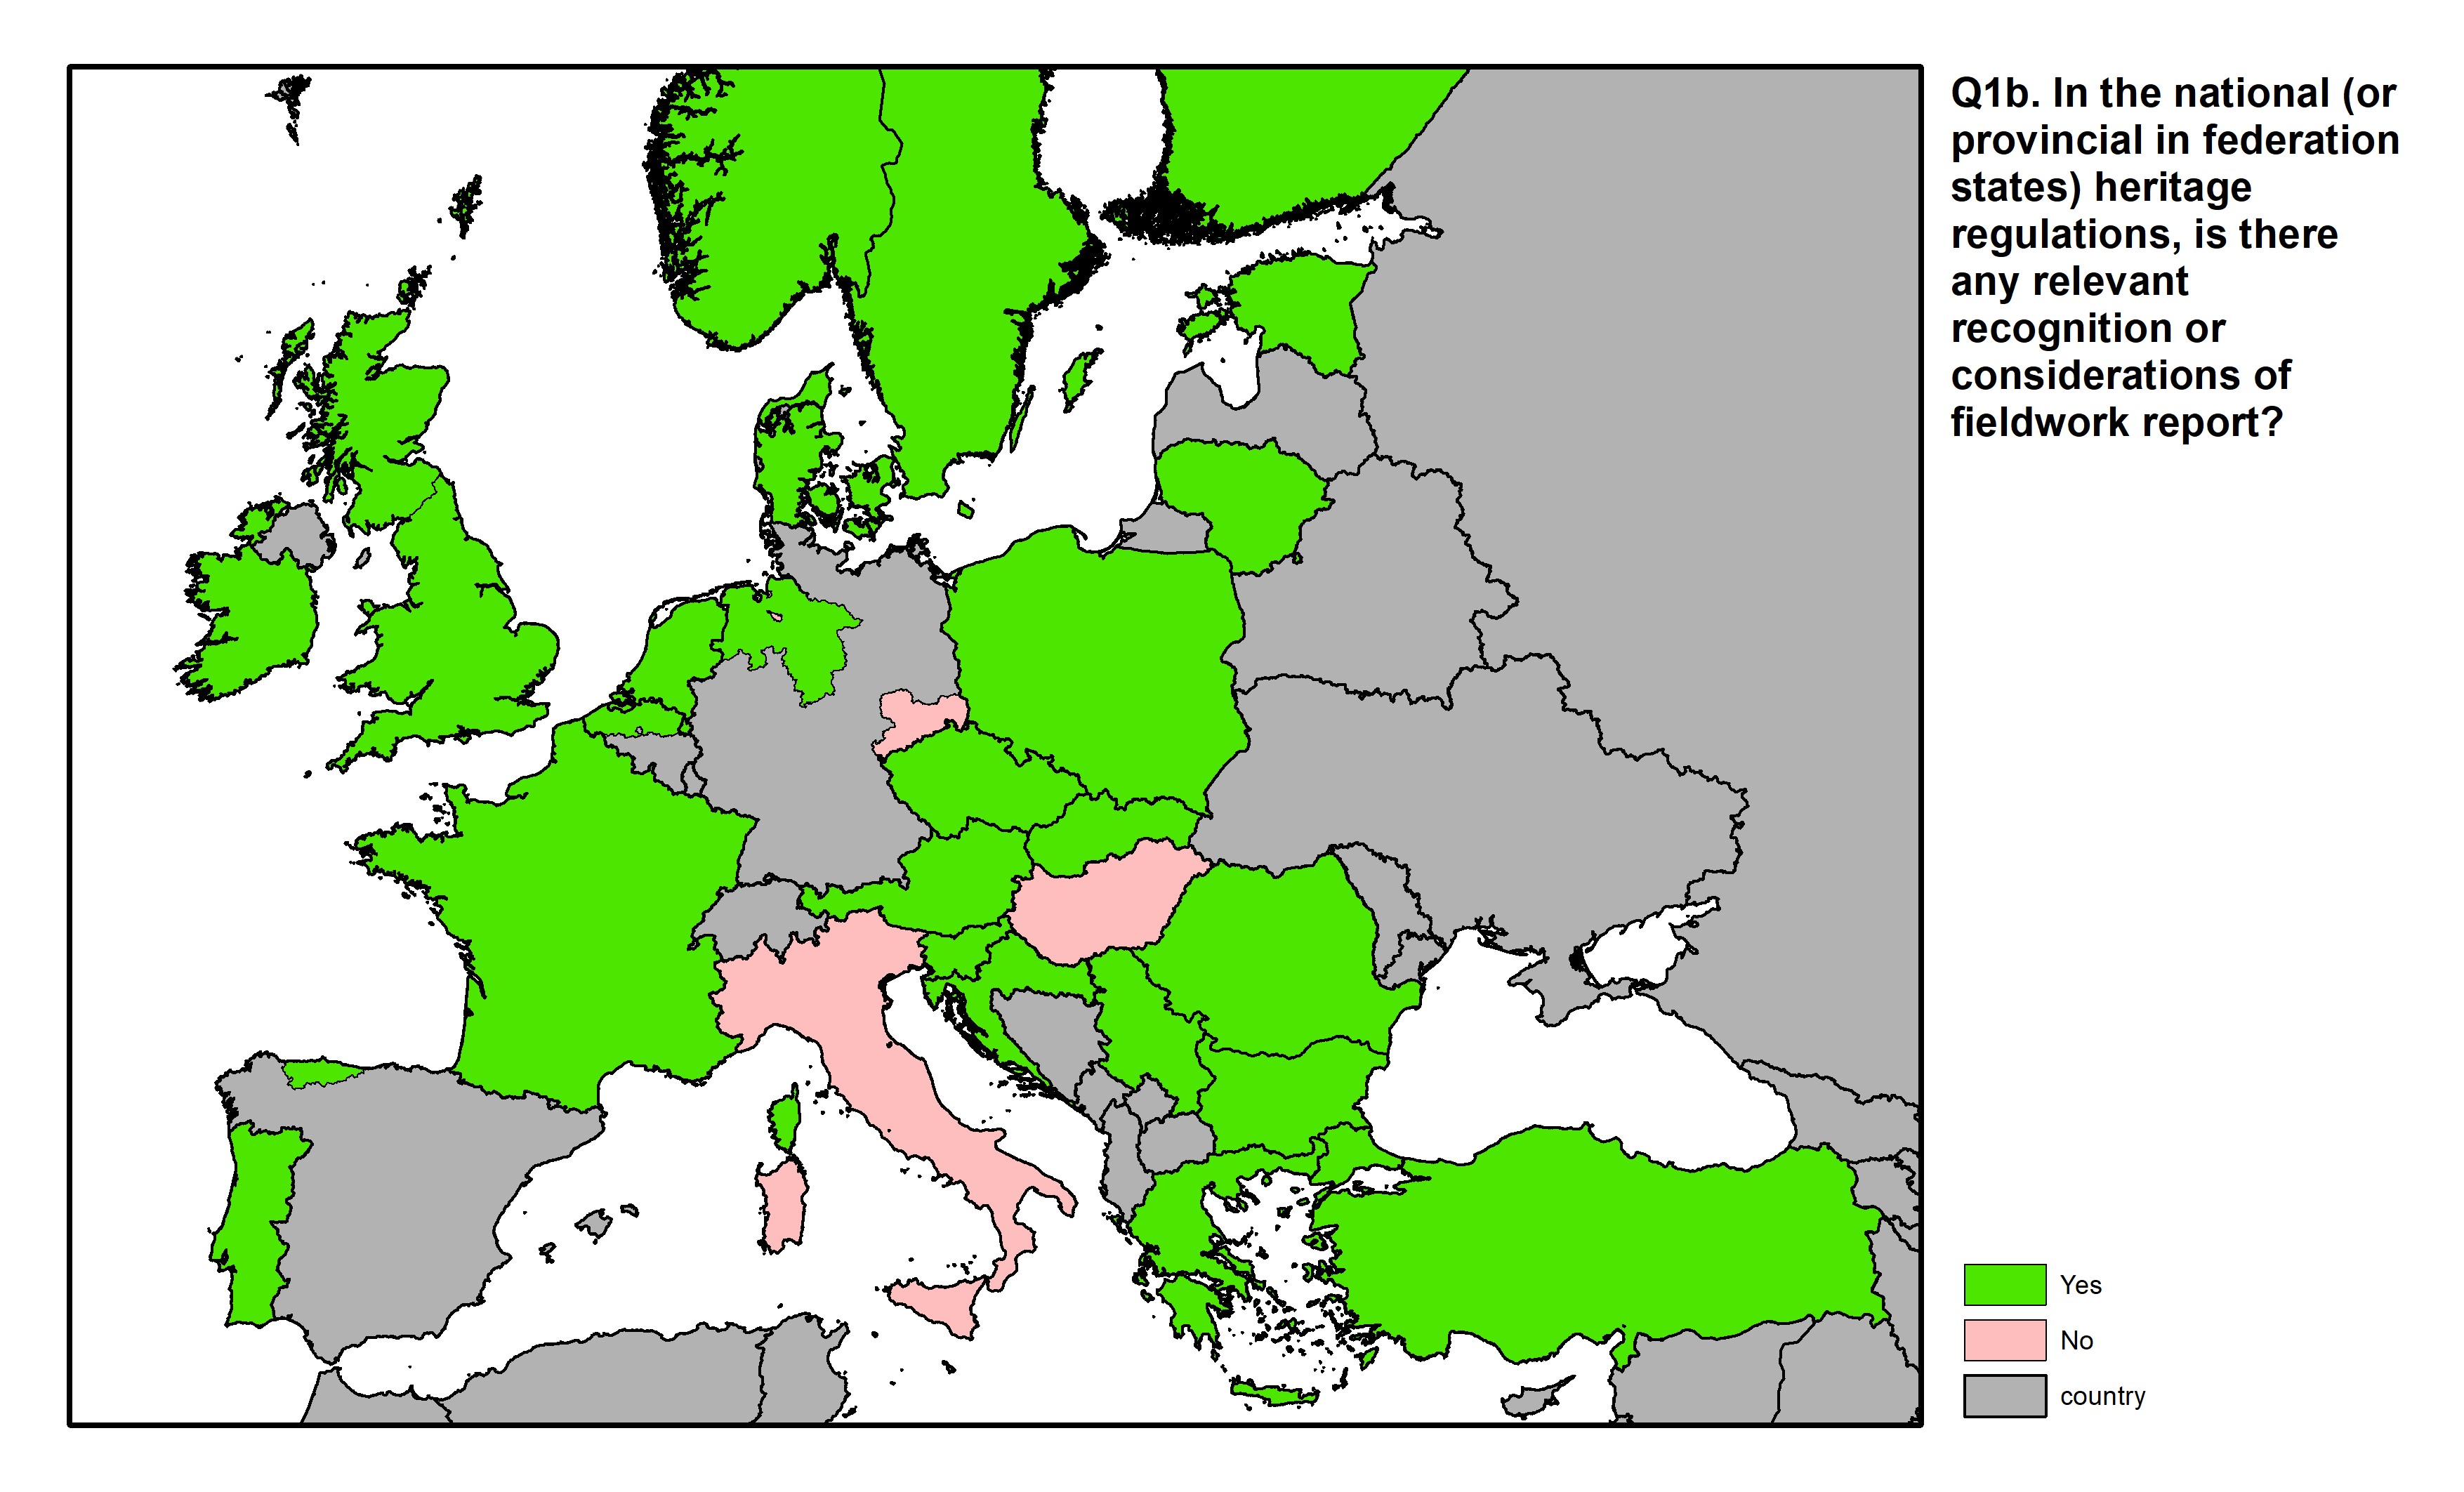 Figure 3: a map of Europe showing countries and regions in colour based on response rates to the survey question.